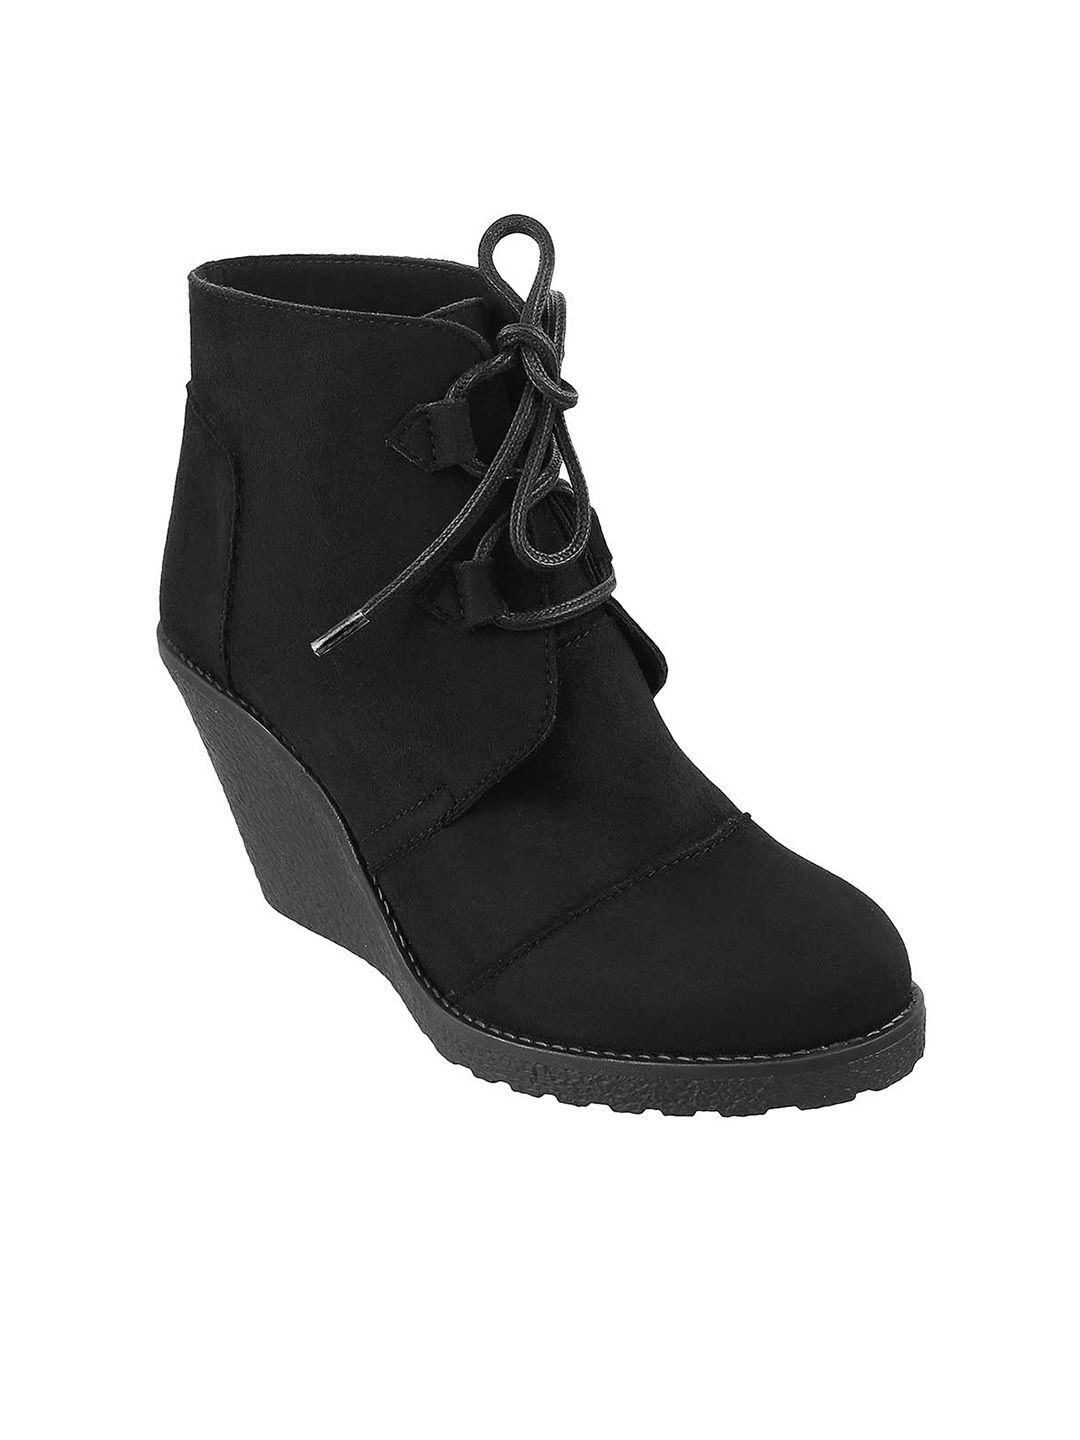 catwalk black textured party wedge heeled boots